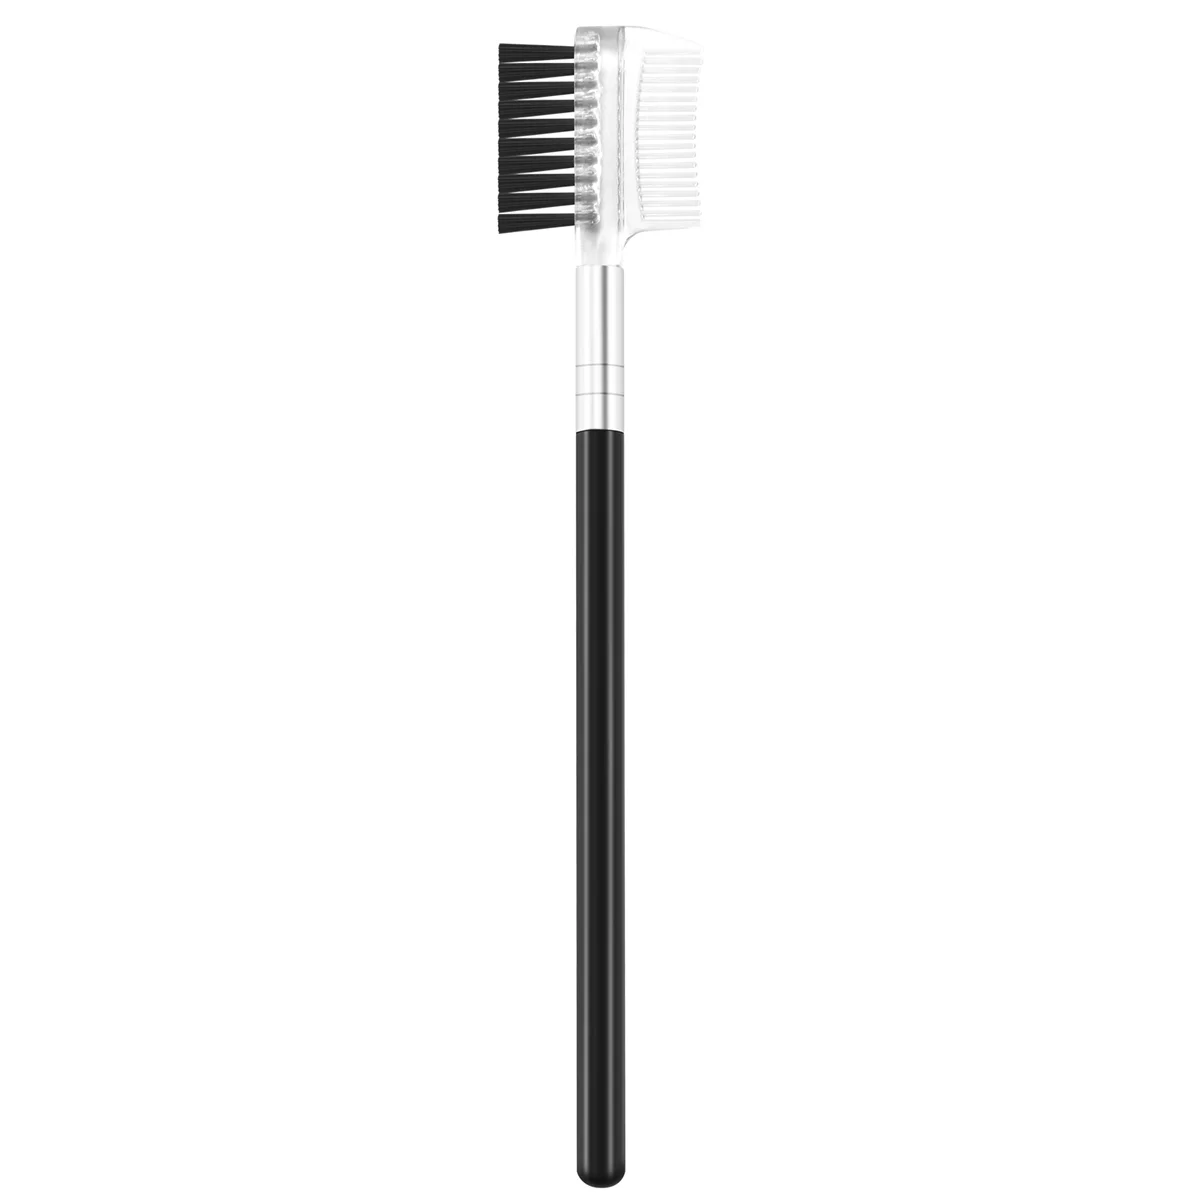 

Women Double-sides Brow Comb Eyebrow Brush Wood Holder Make-up Cosmetic Makeup Tool 1pcs Black